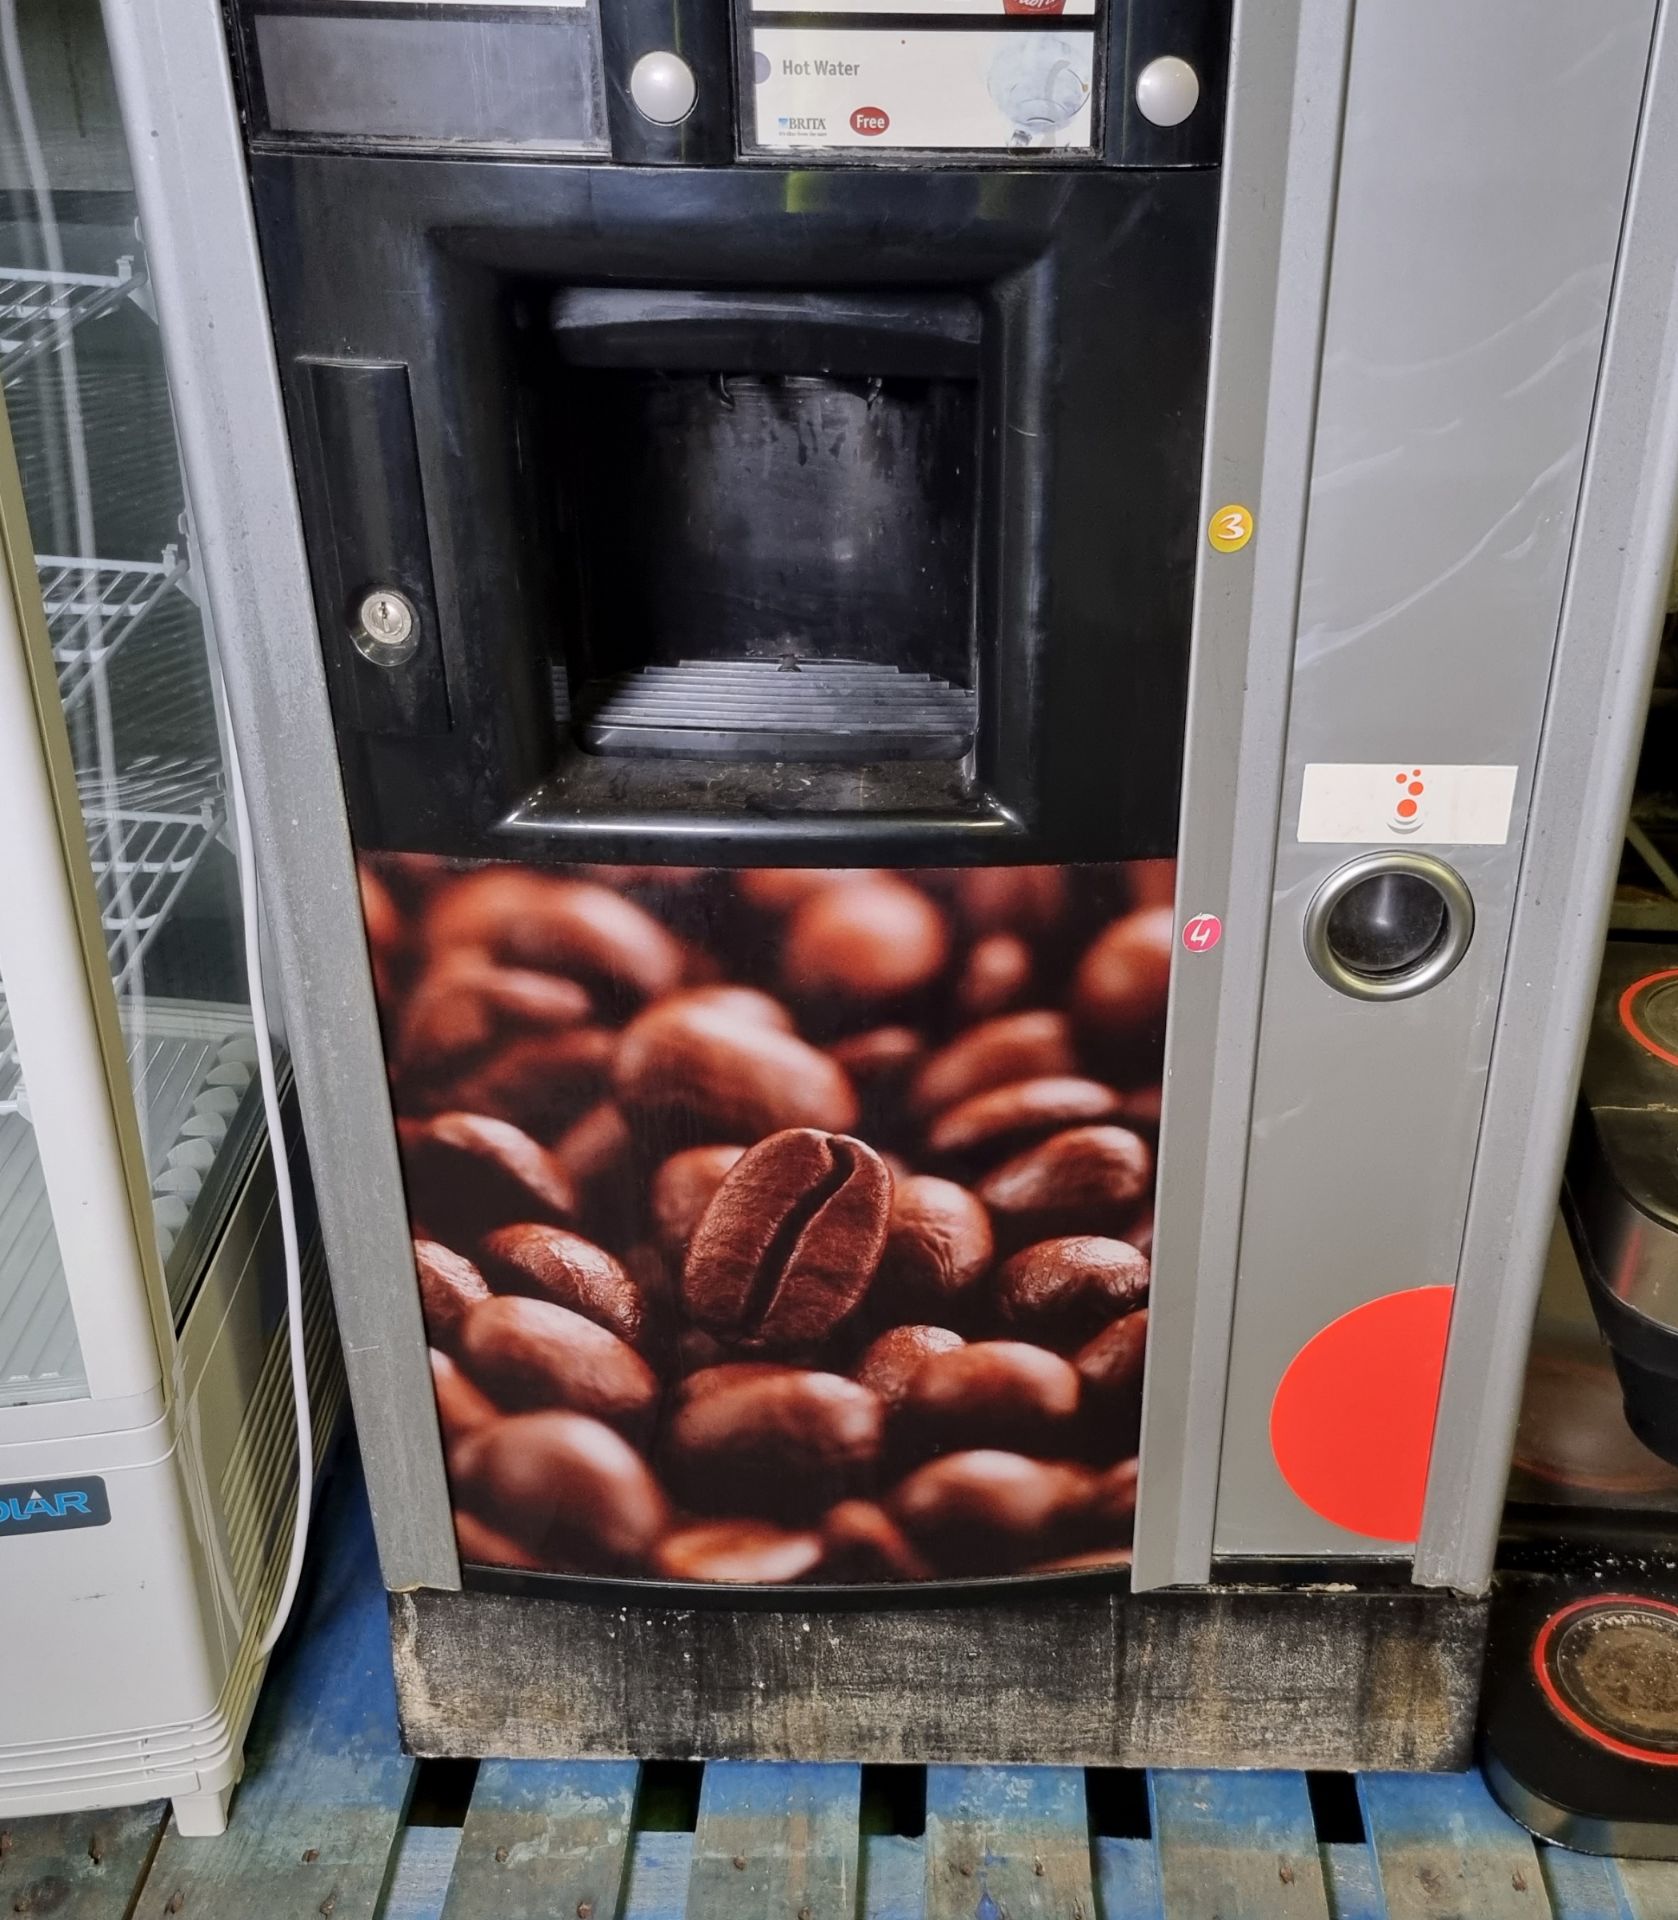 Miofino 960406 Selecta drinks vending machine - coin operated - 240V 50Hz - L 650 x W 730 x H 1830mm - Image 5 of 5